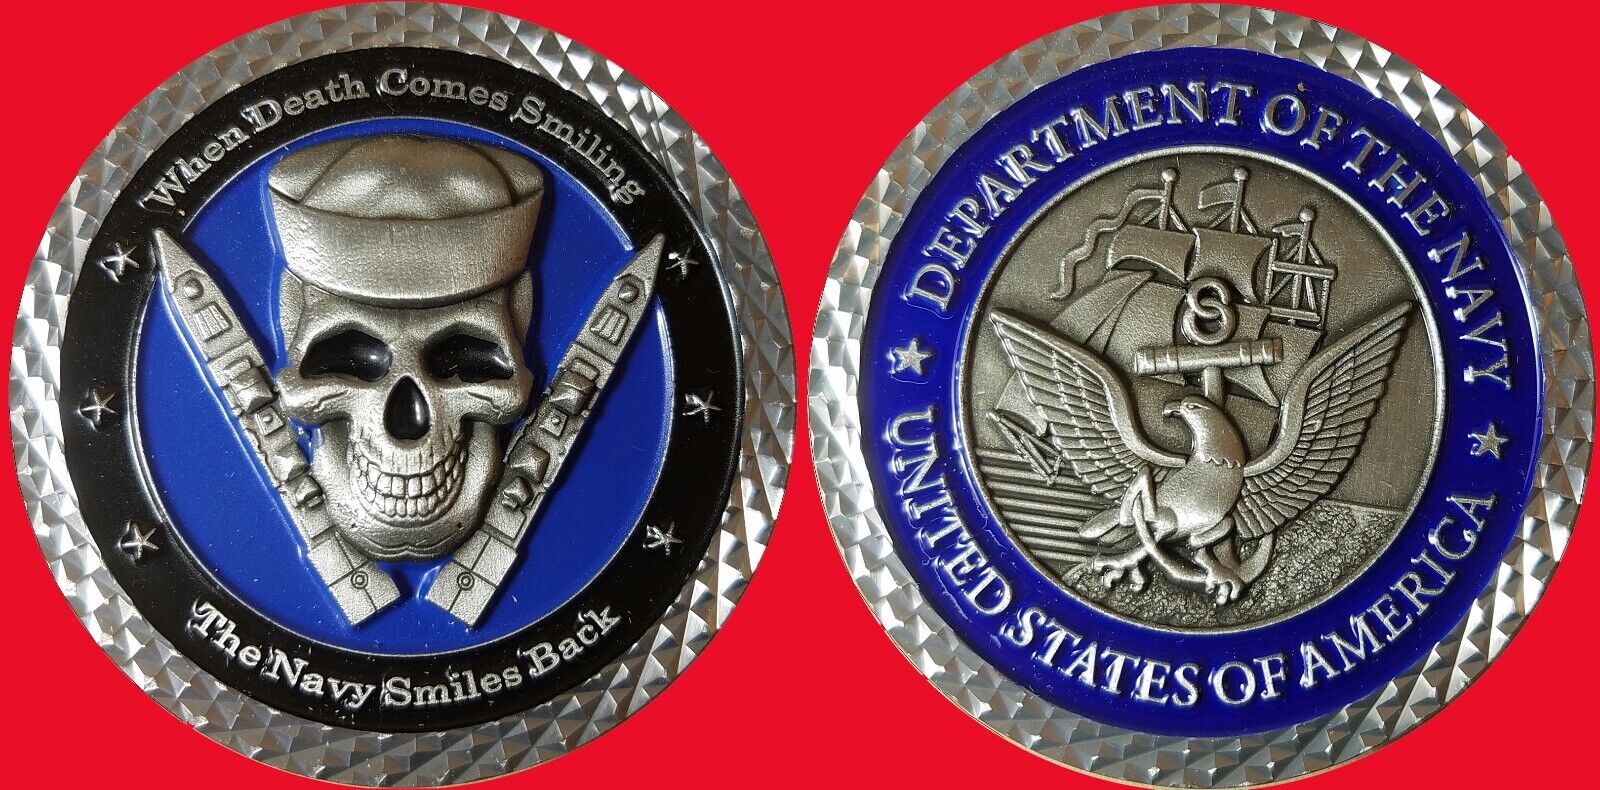   US Navy when the reaper comes smiling the navy smiles back challenge coin 17